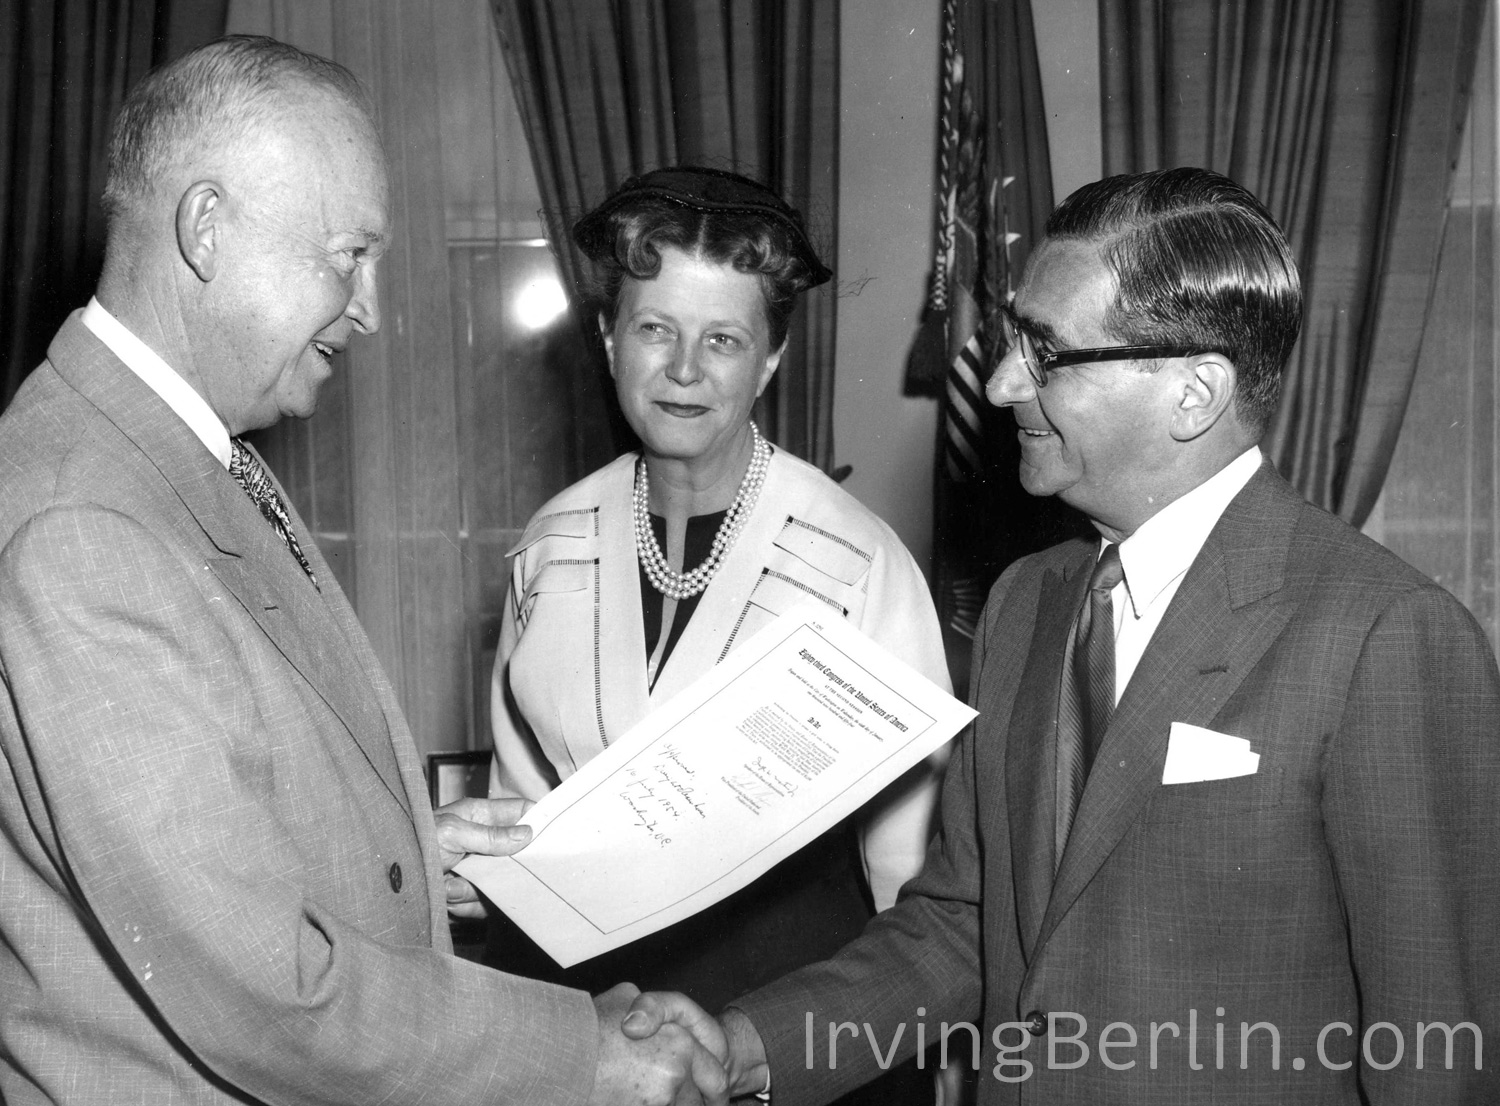  Irving Berlin, pictured with his wife Ellin, receiving a Congressional Gold Medal from President Eisenhower. 